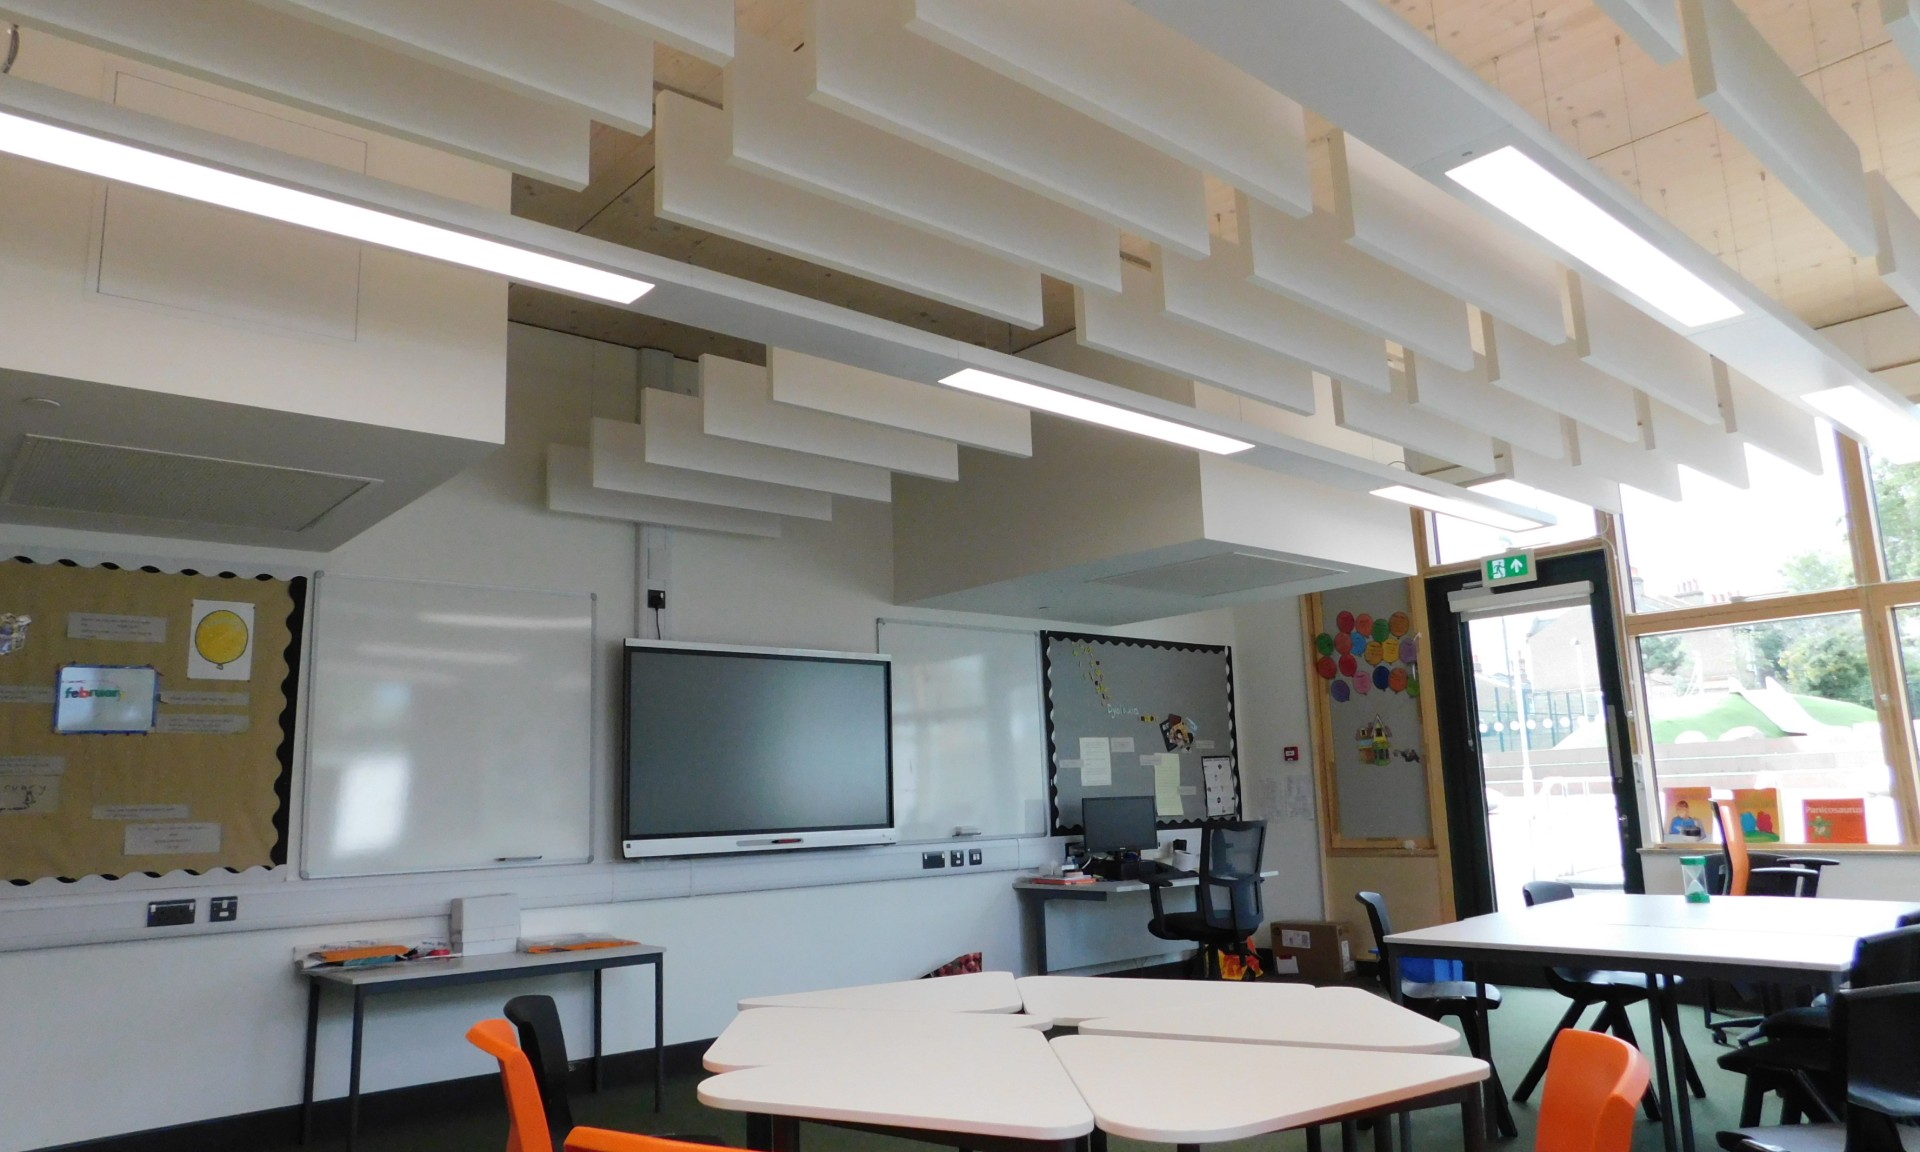 Breathing Buildings provides top-class low-energy ventilation solution to RIBA award-winning school